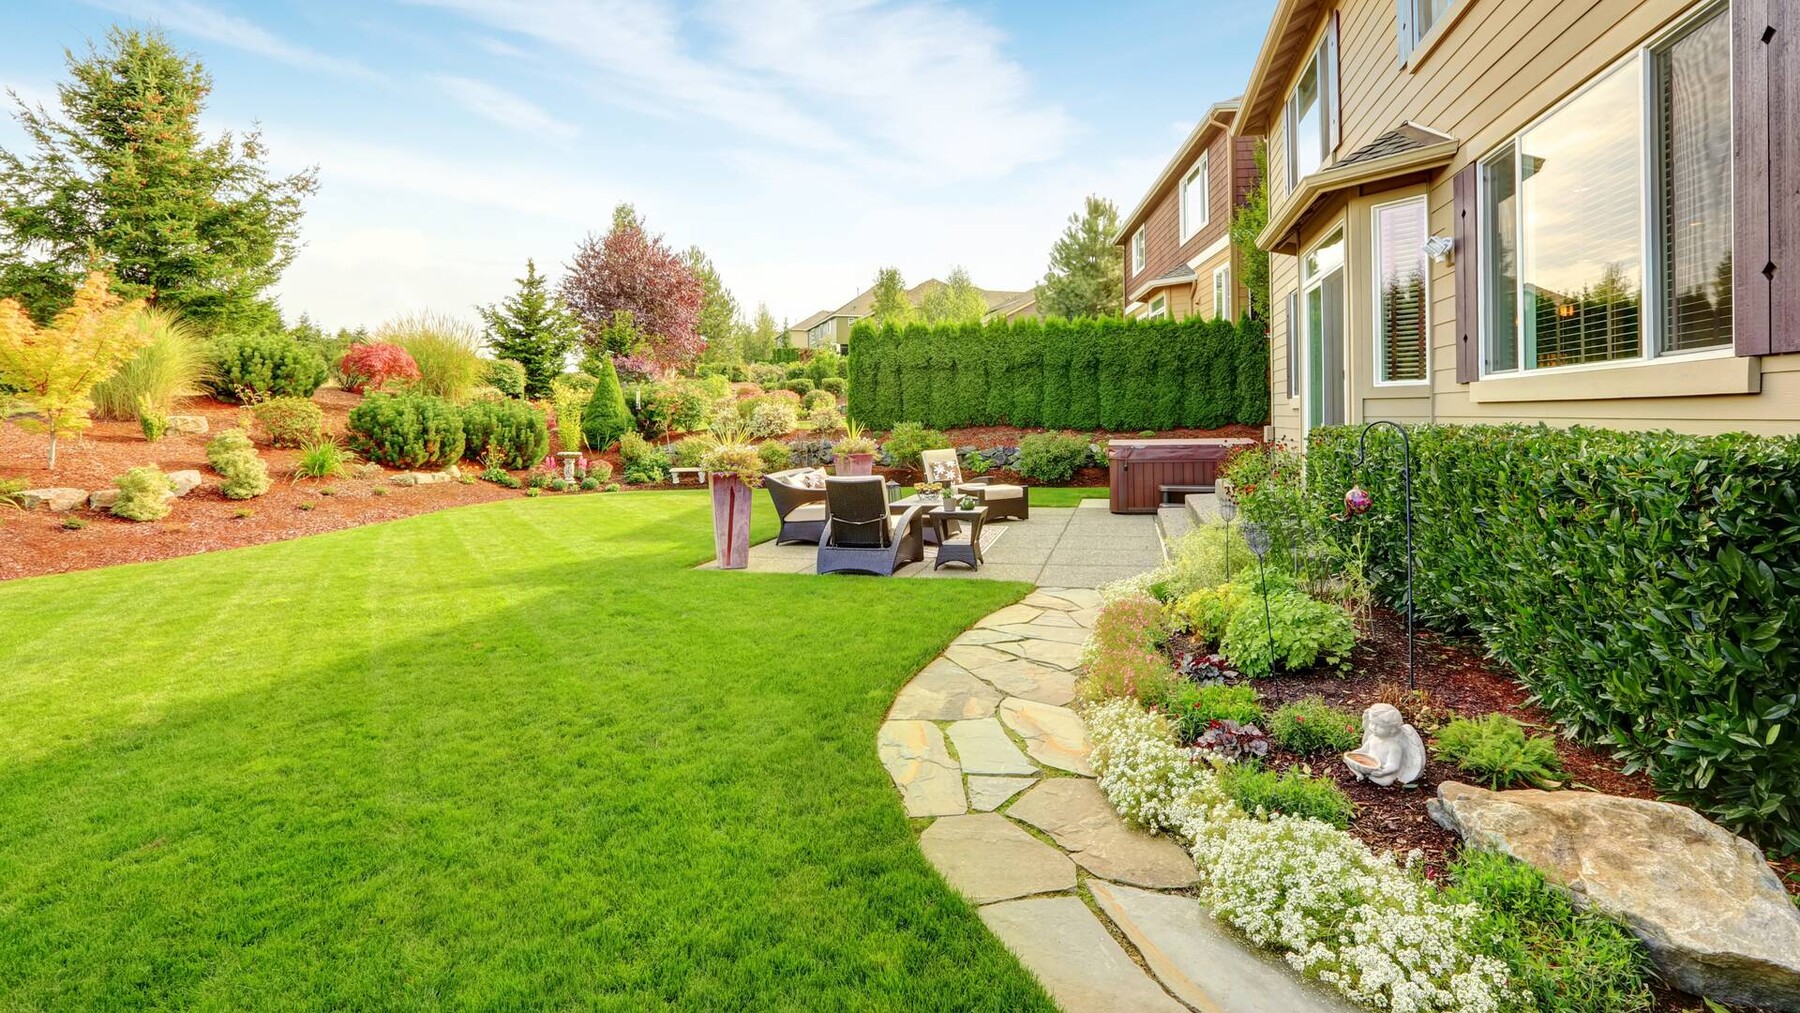 Landscaping By Ld Lifestyles Llc, Professional Landscaping Services Llc